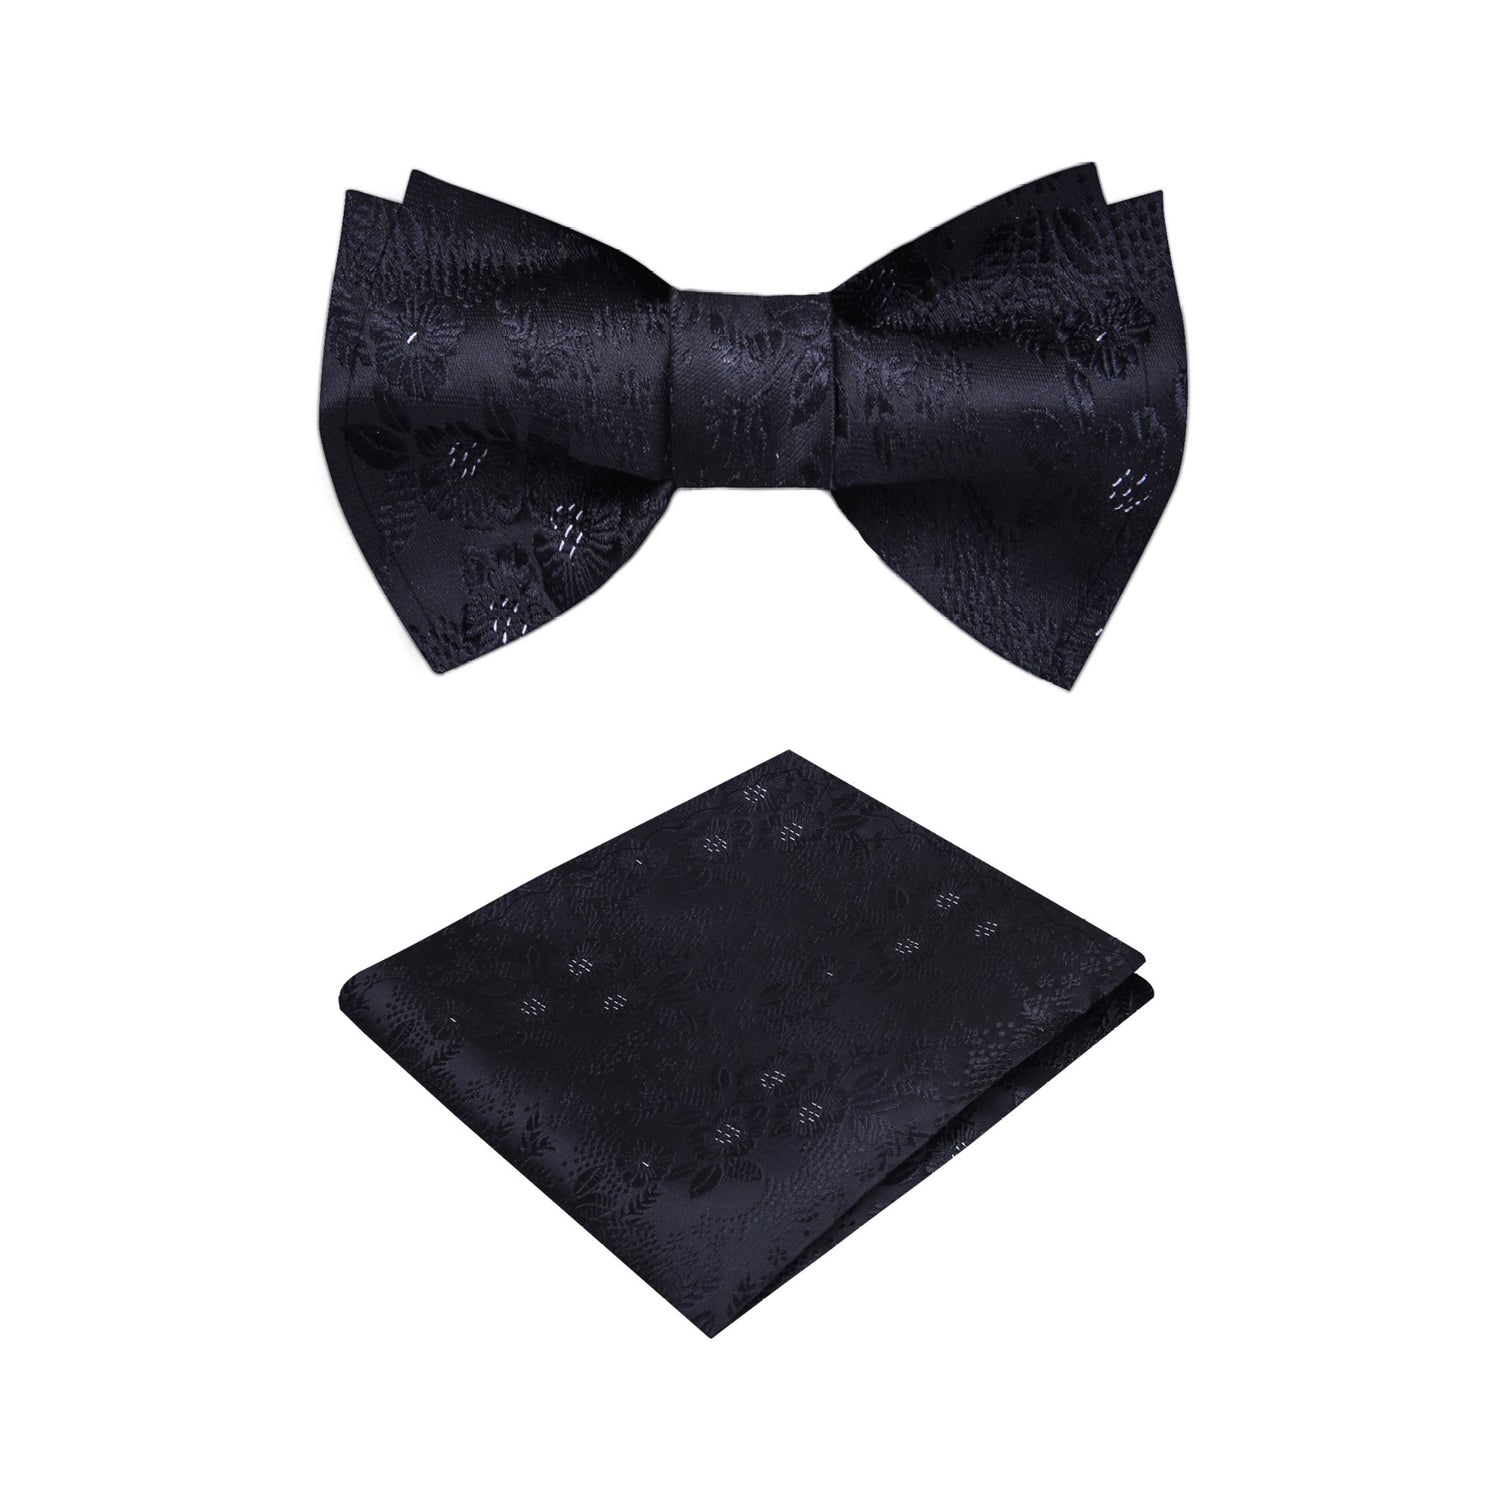 A Black, White Detailed Flowers Pattern Silk Self Tie Bow Tie, Matching Pocket Square